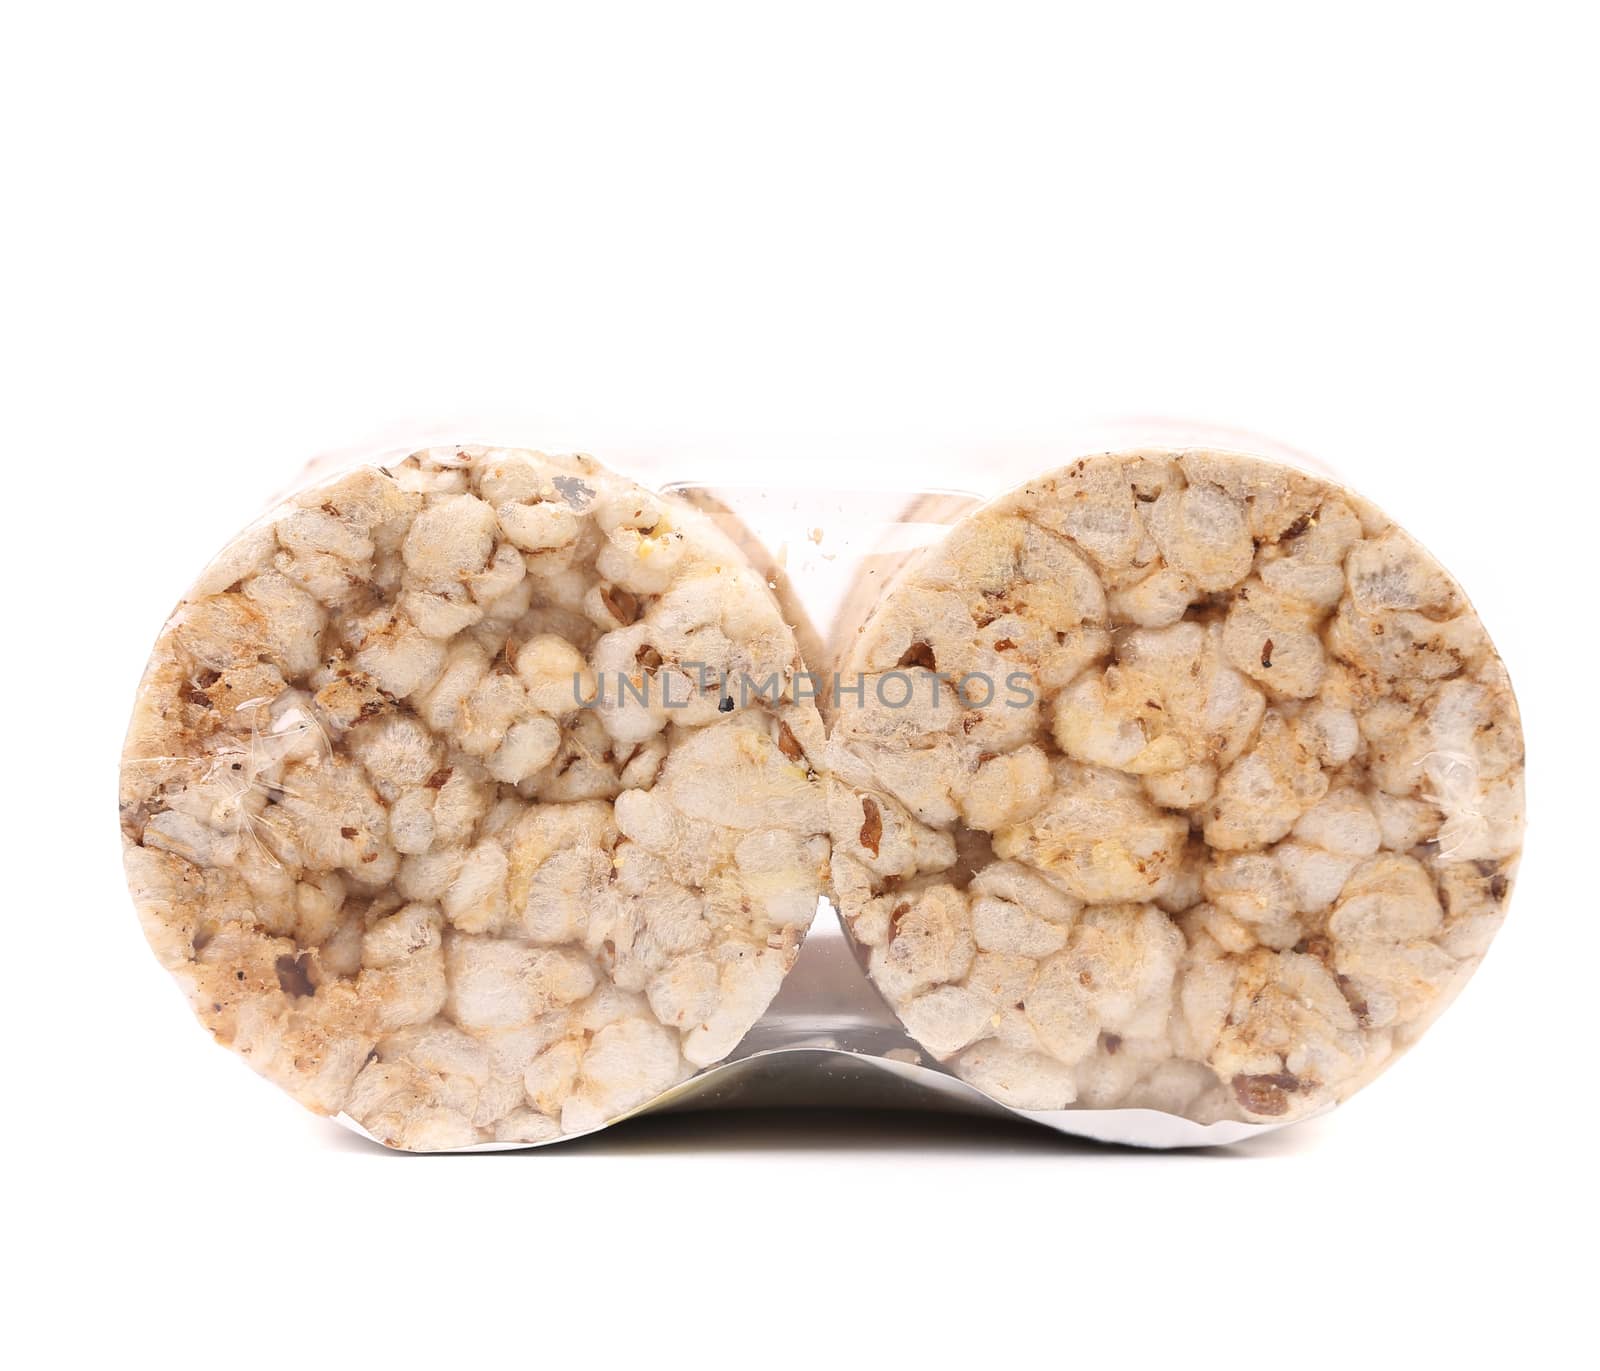 Puffed rice snack. Close up. White background.